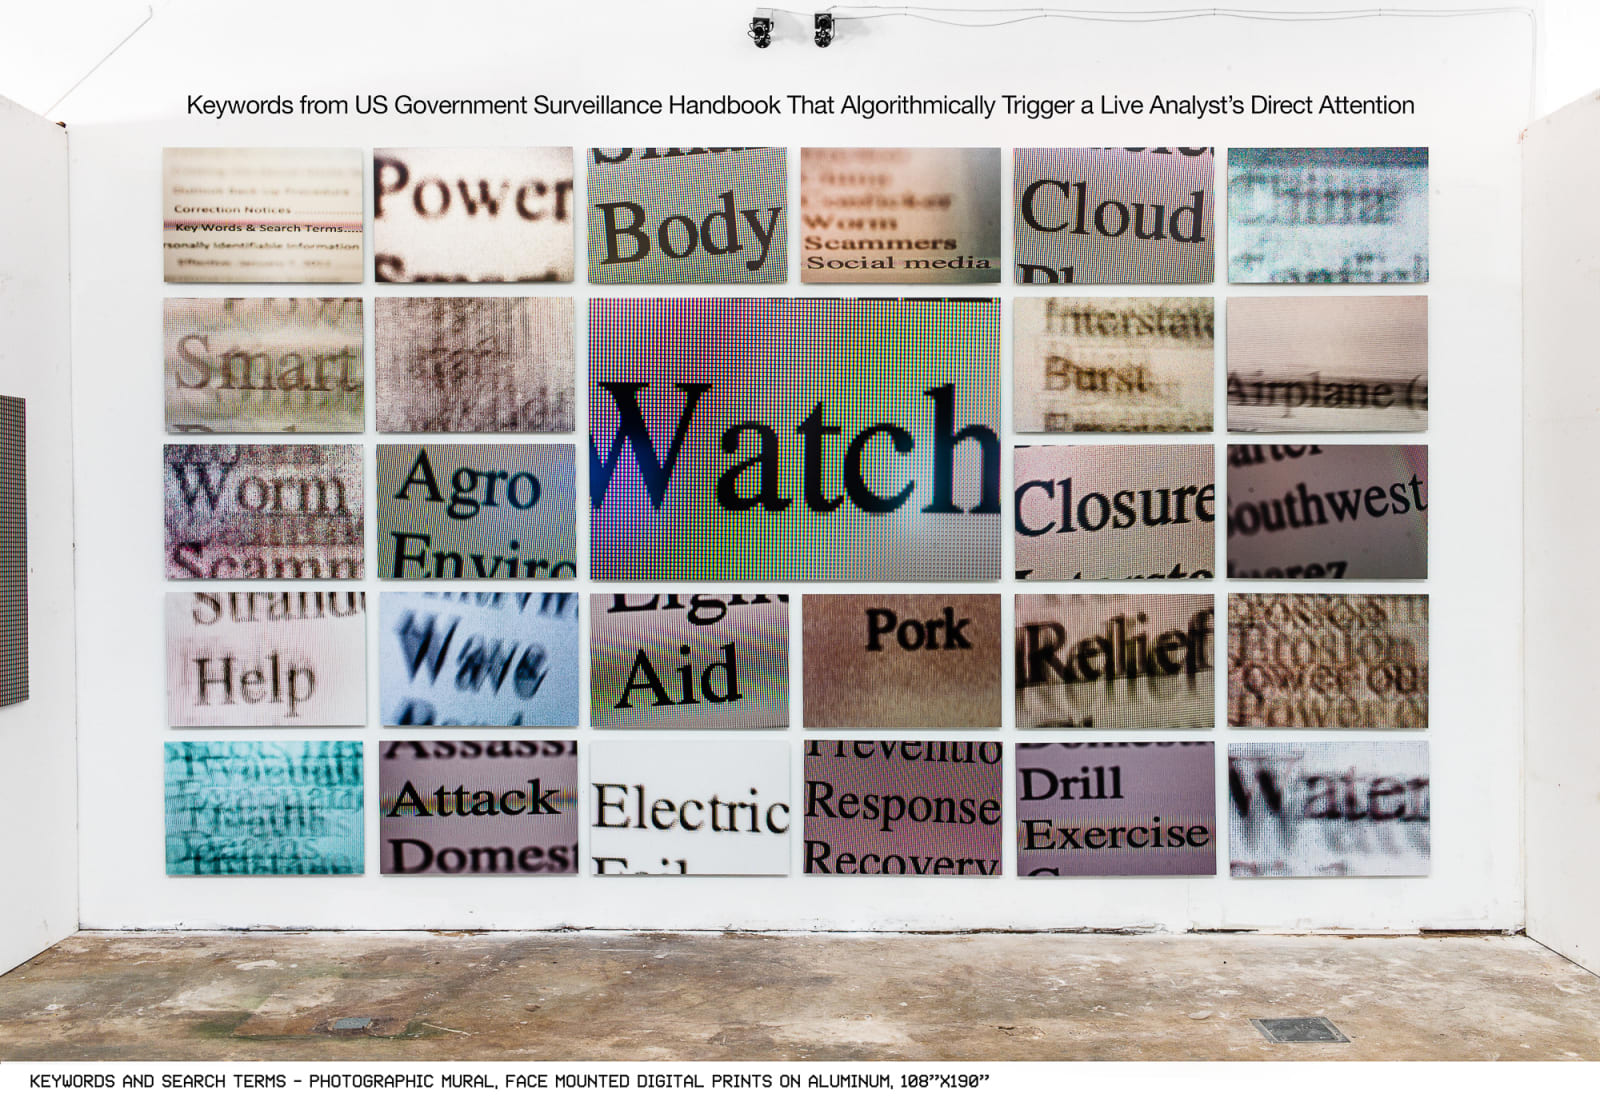 Sol Hill, Keywords and Search Terms, 2014